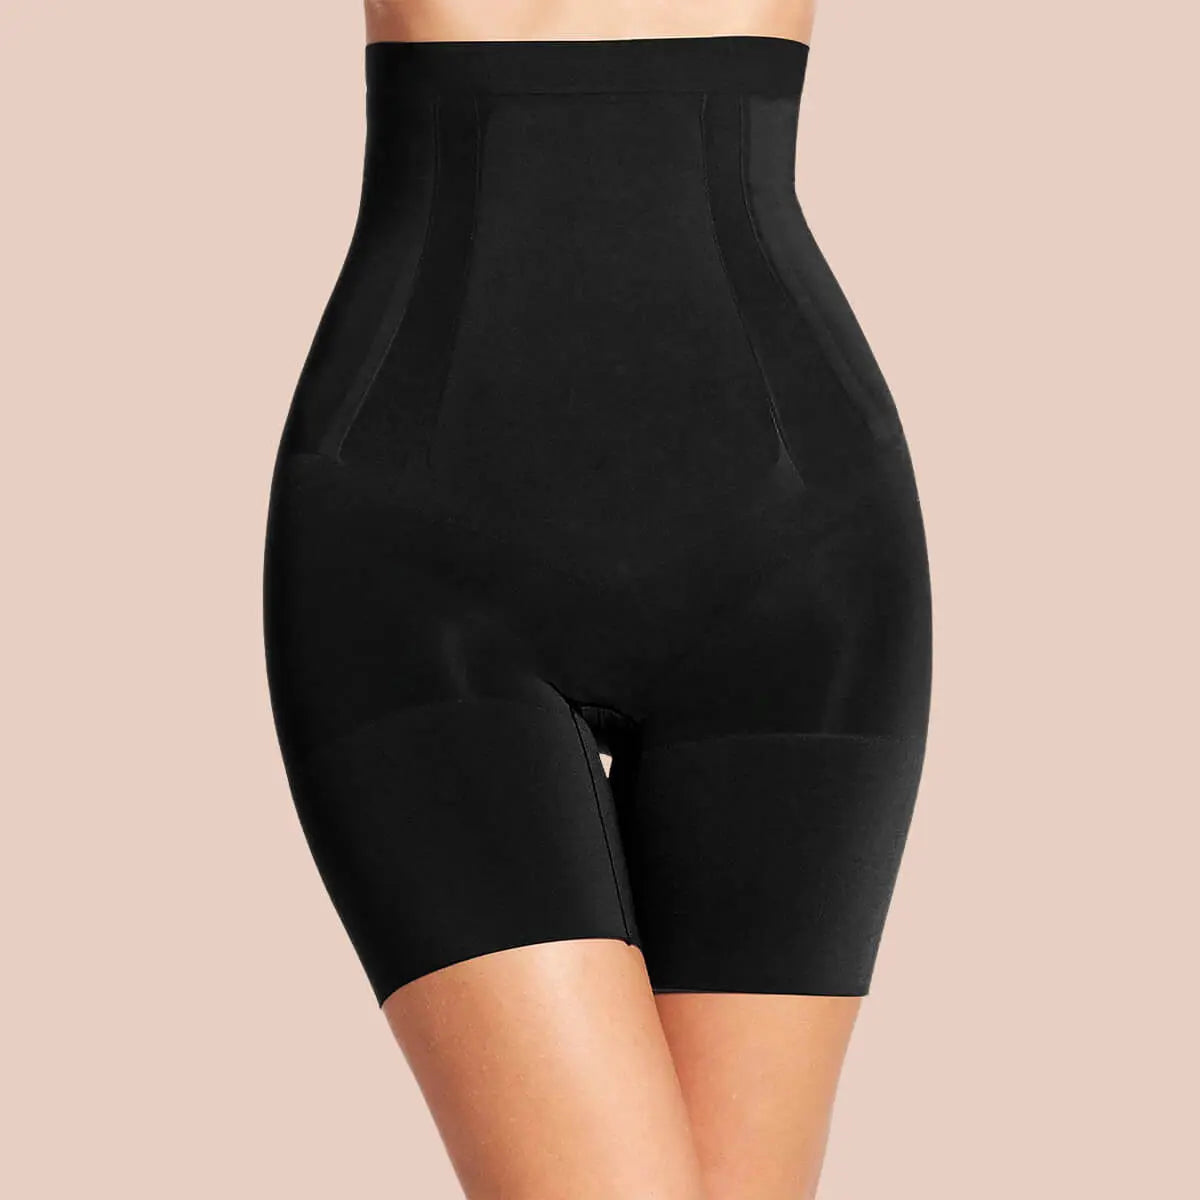 Polyester Spandex Tummy Control High Waist Body Shaper at Rs 350